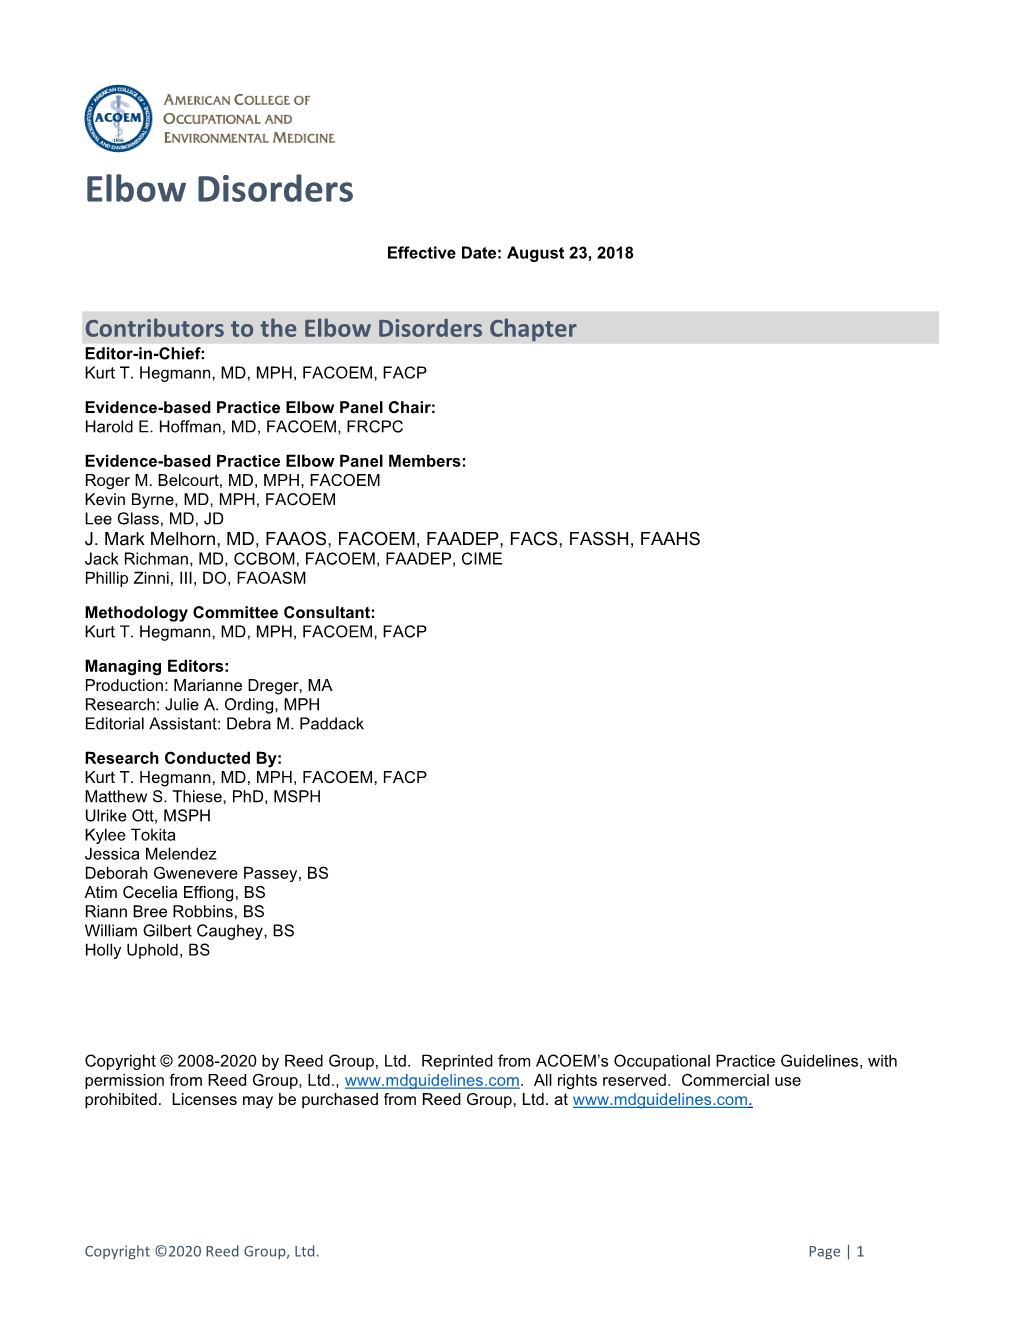 Elbow Disorders Guideline